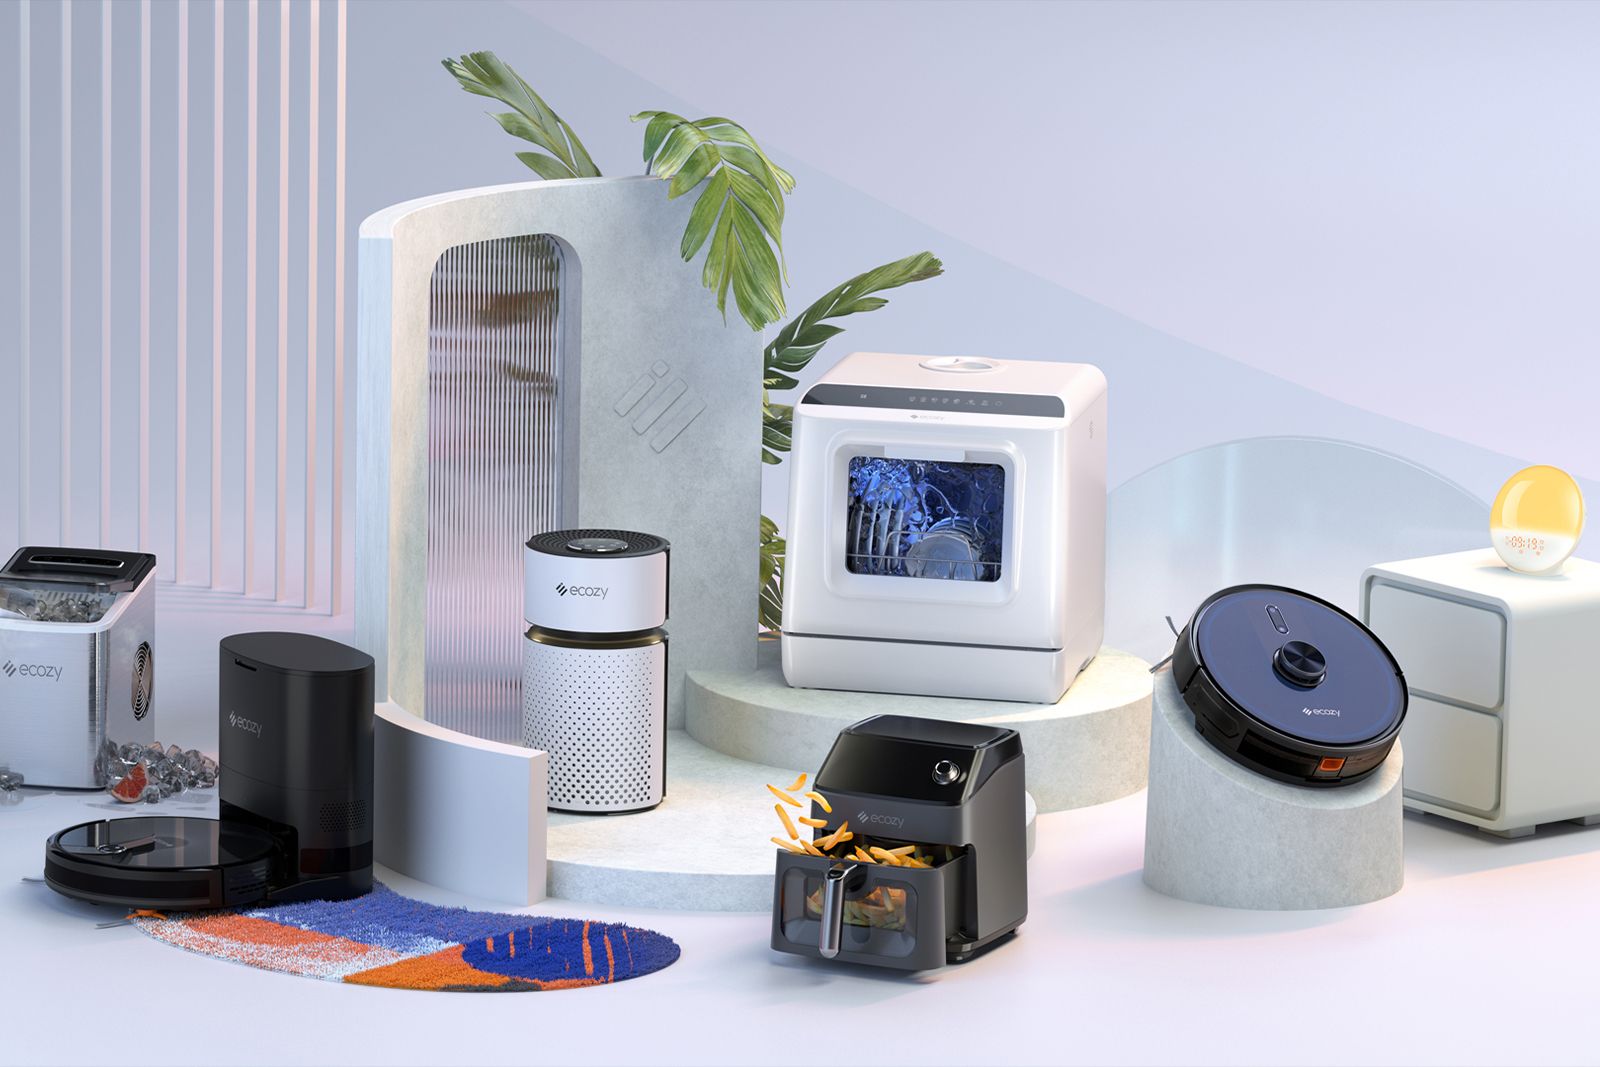 These 5 ecozy appliances are thoughtful gifts to give someone this holiday photo 7